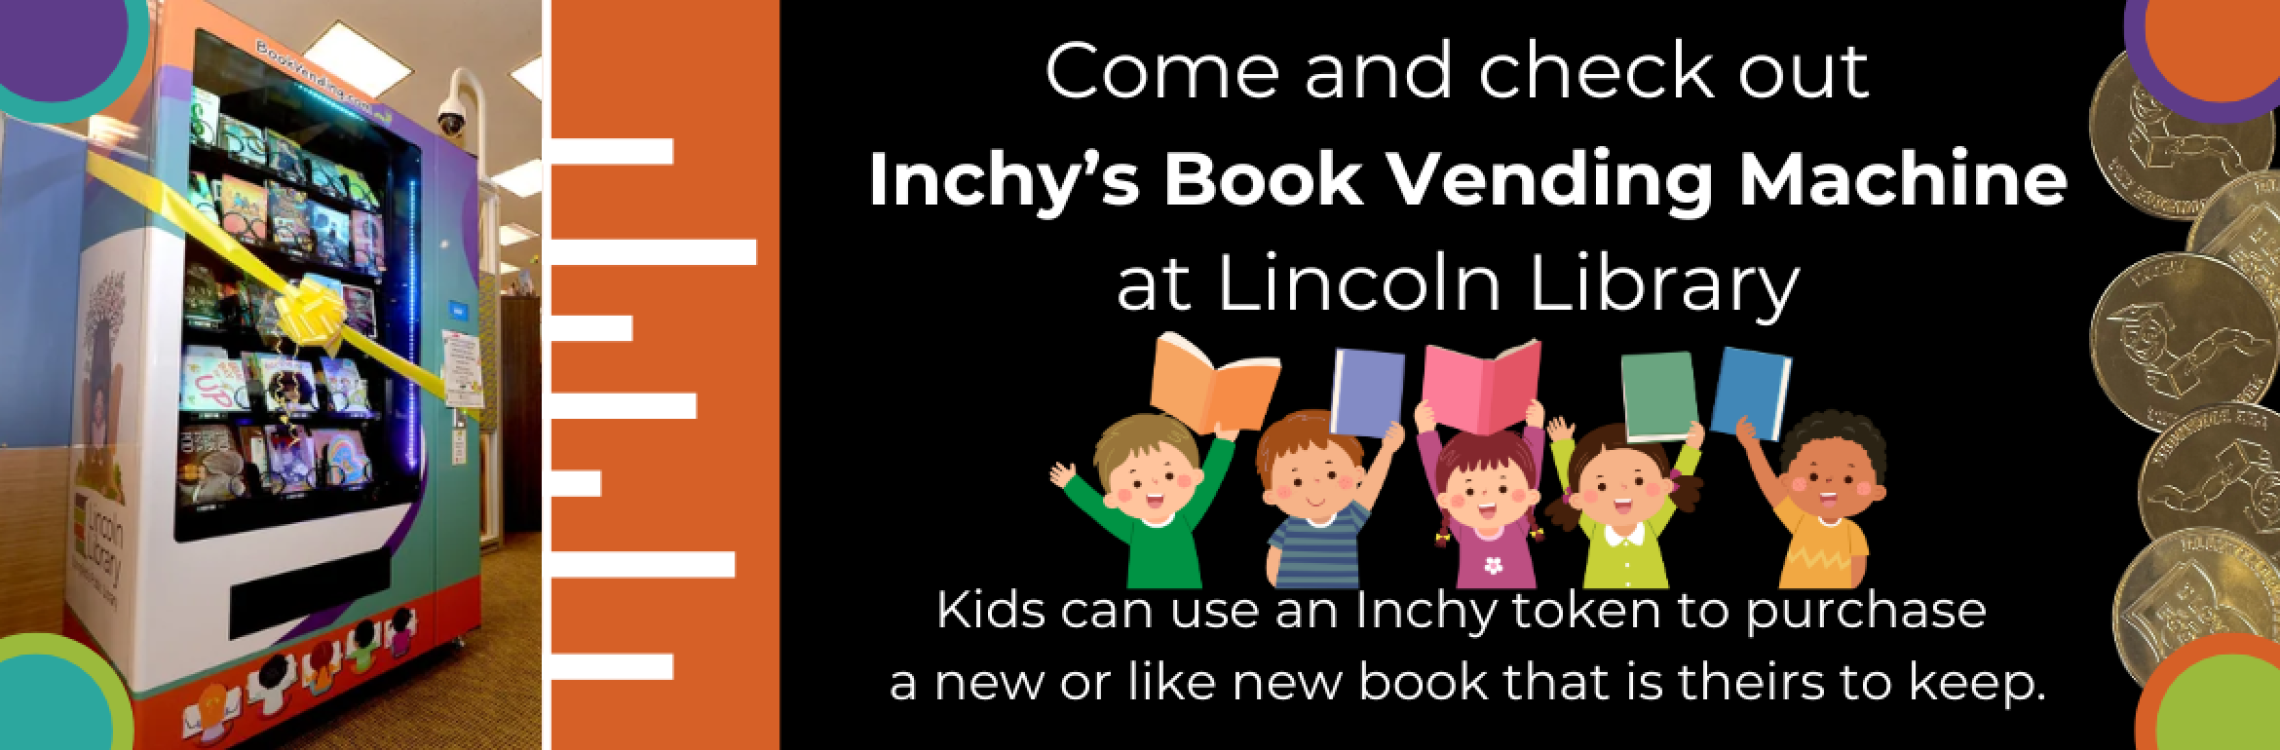 Inchy's Book Vending Machine. Kids can use an Inchy token to purchase a new or like new book that is theirs to keep.